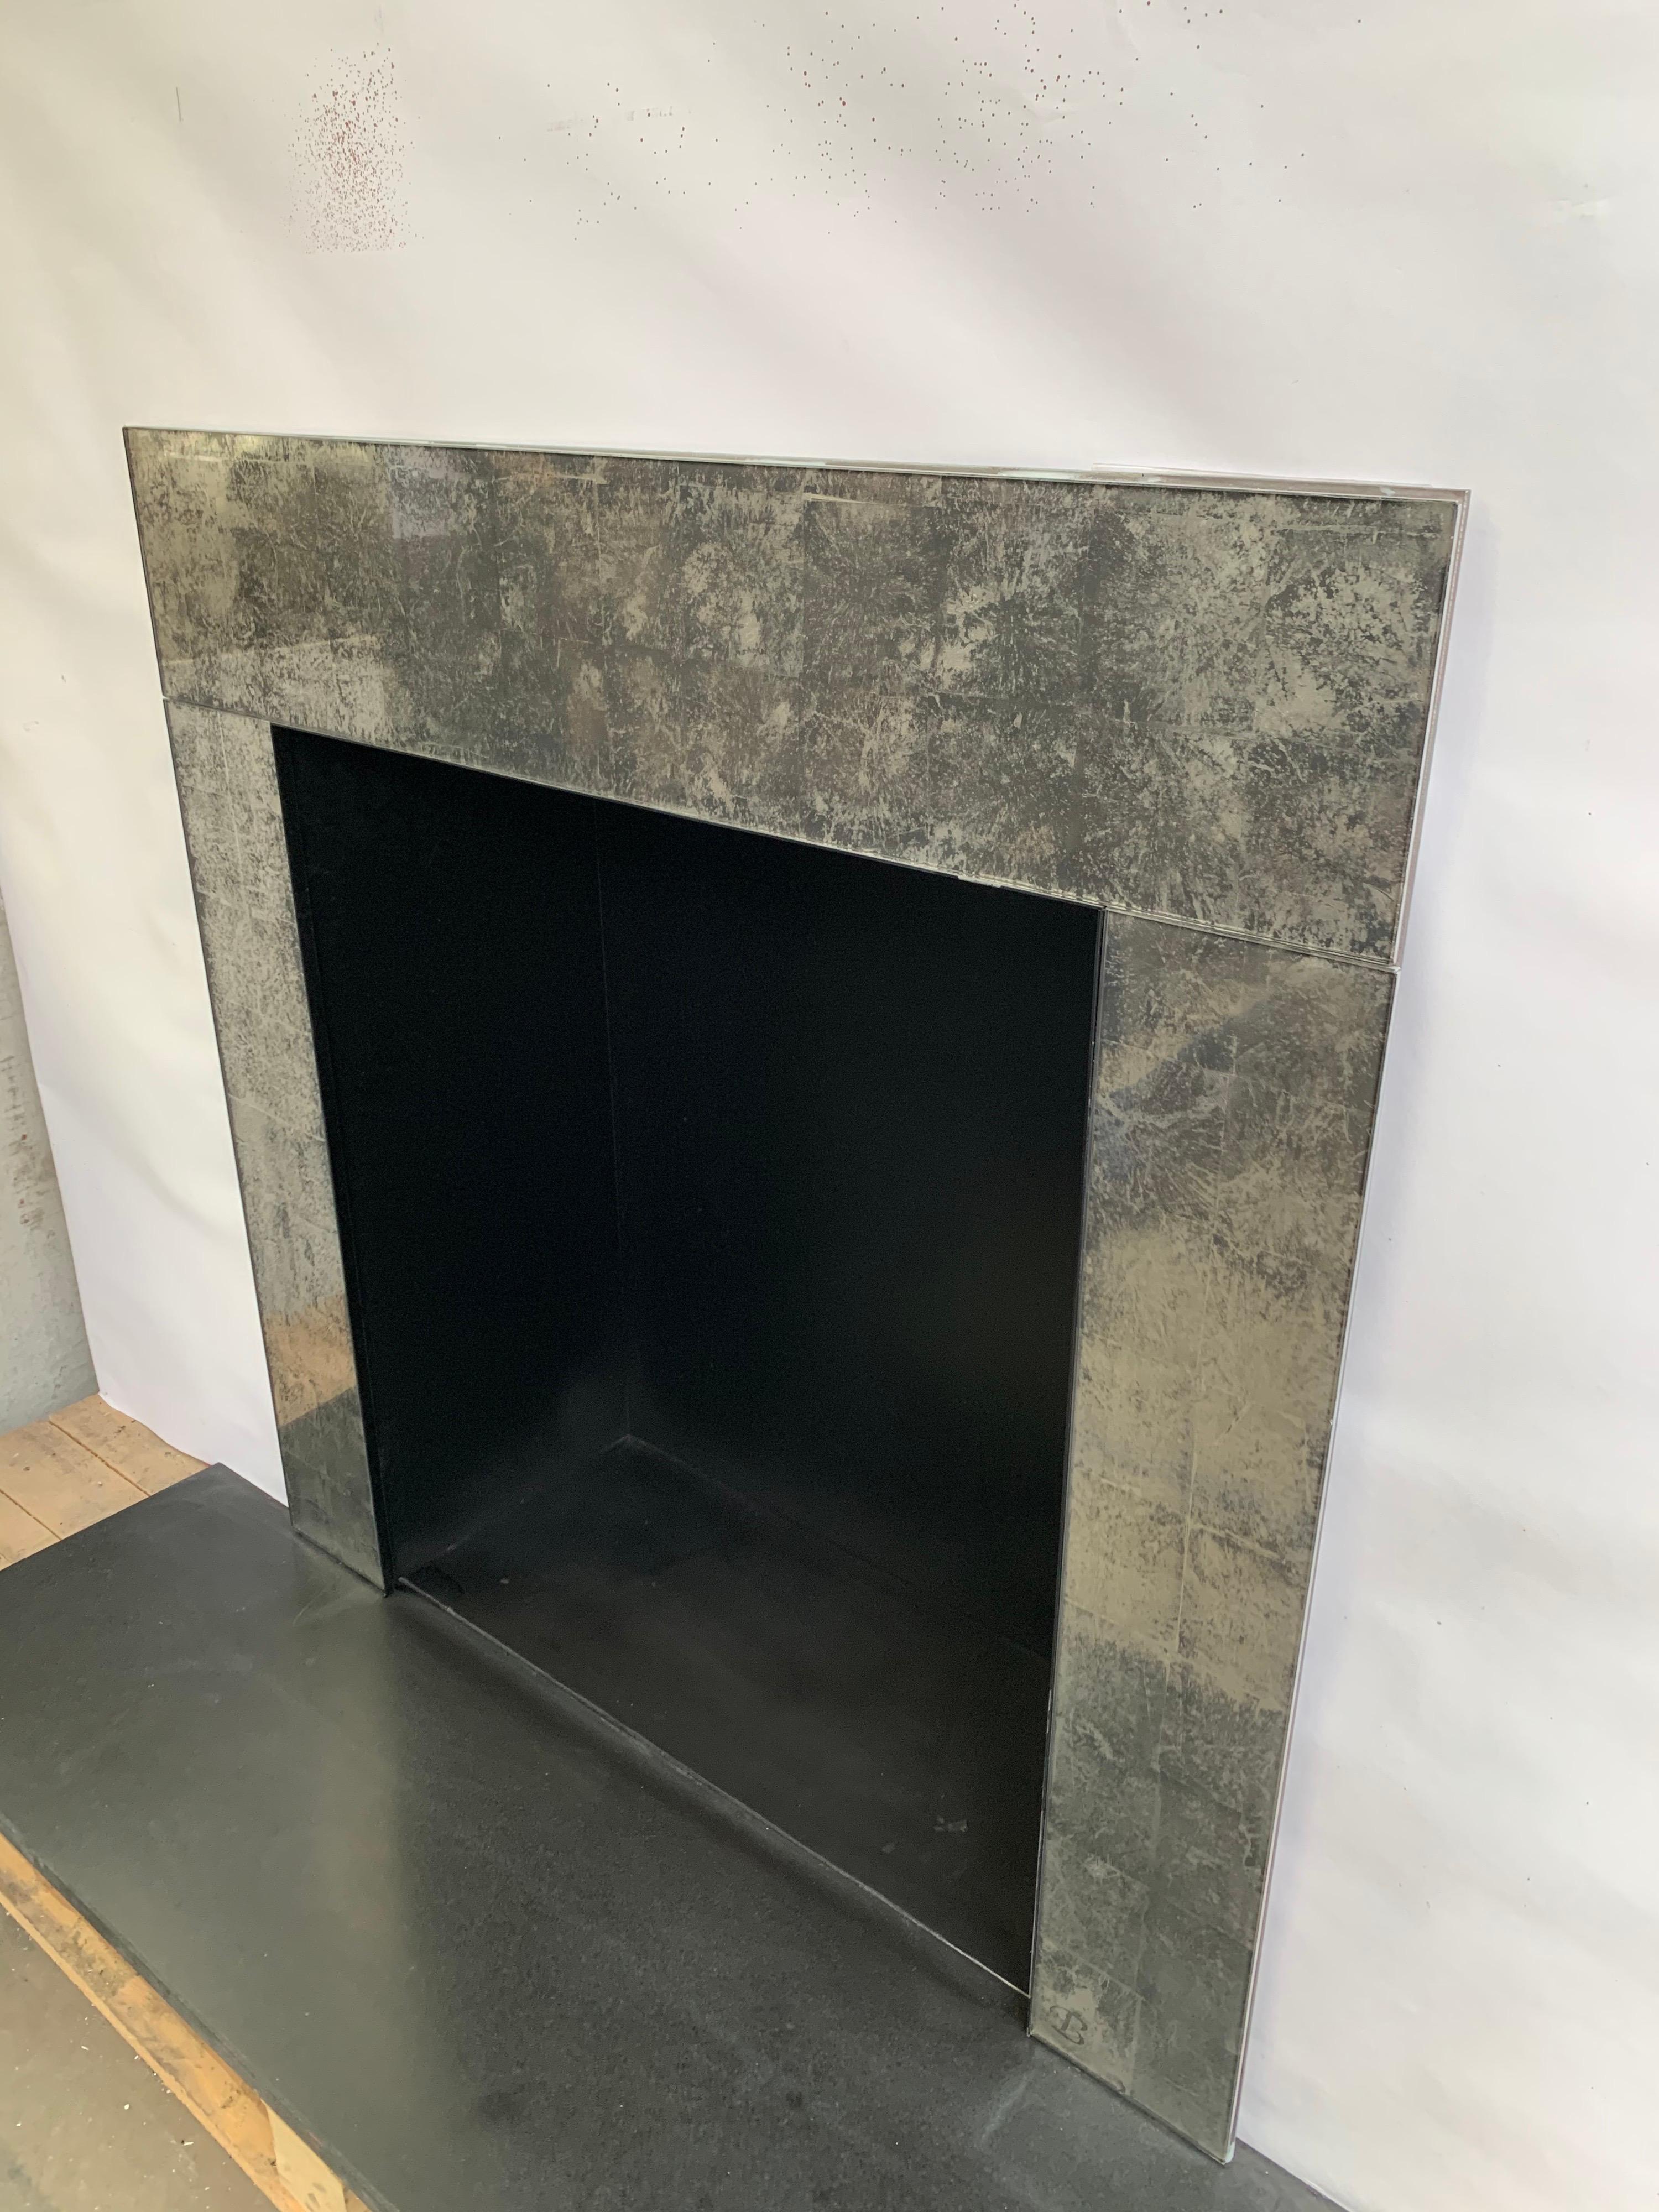 English 21st Century Antique Glass & Steel Fireplace Insert For Sale